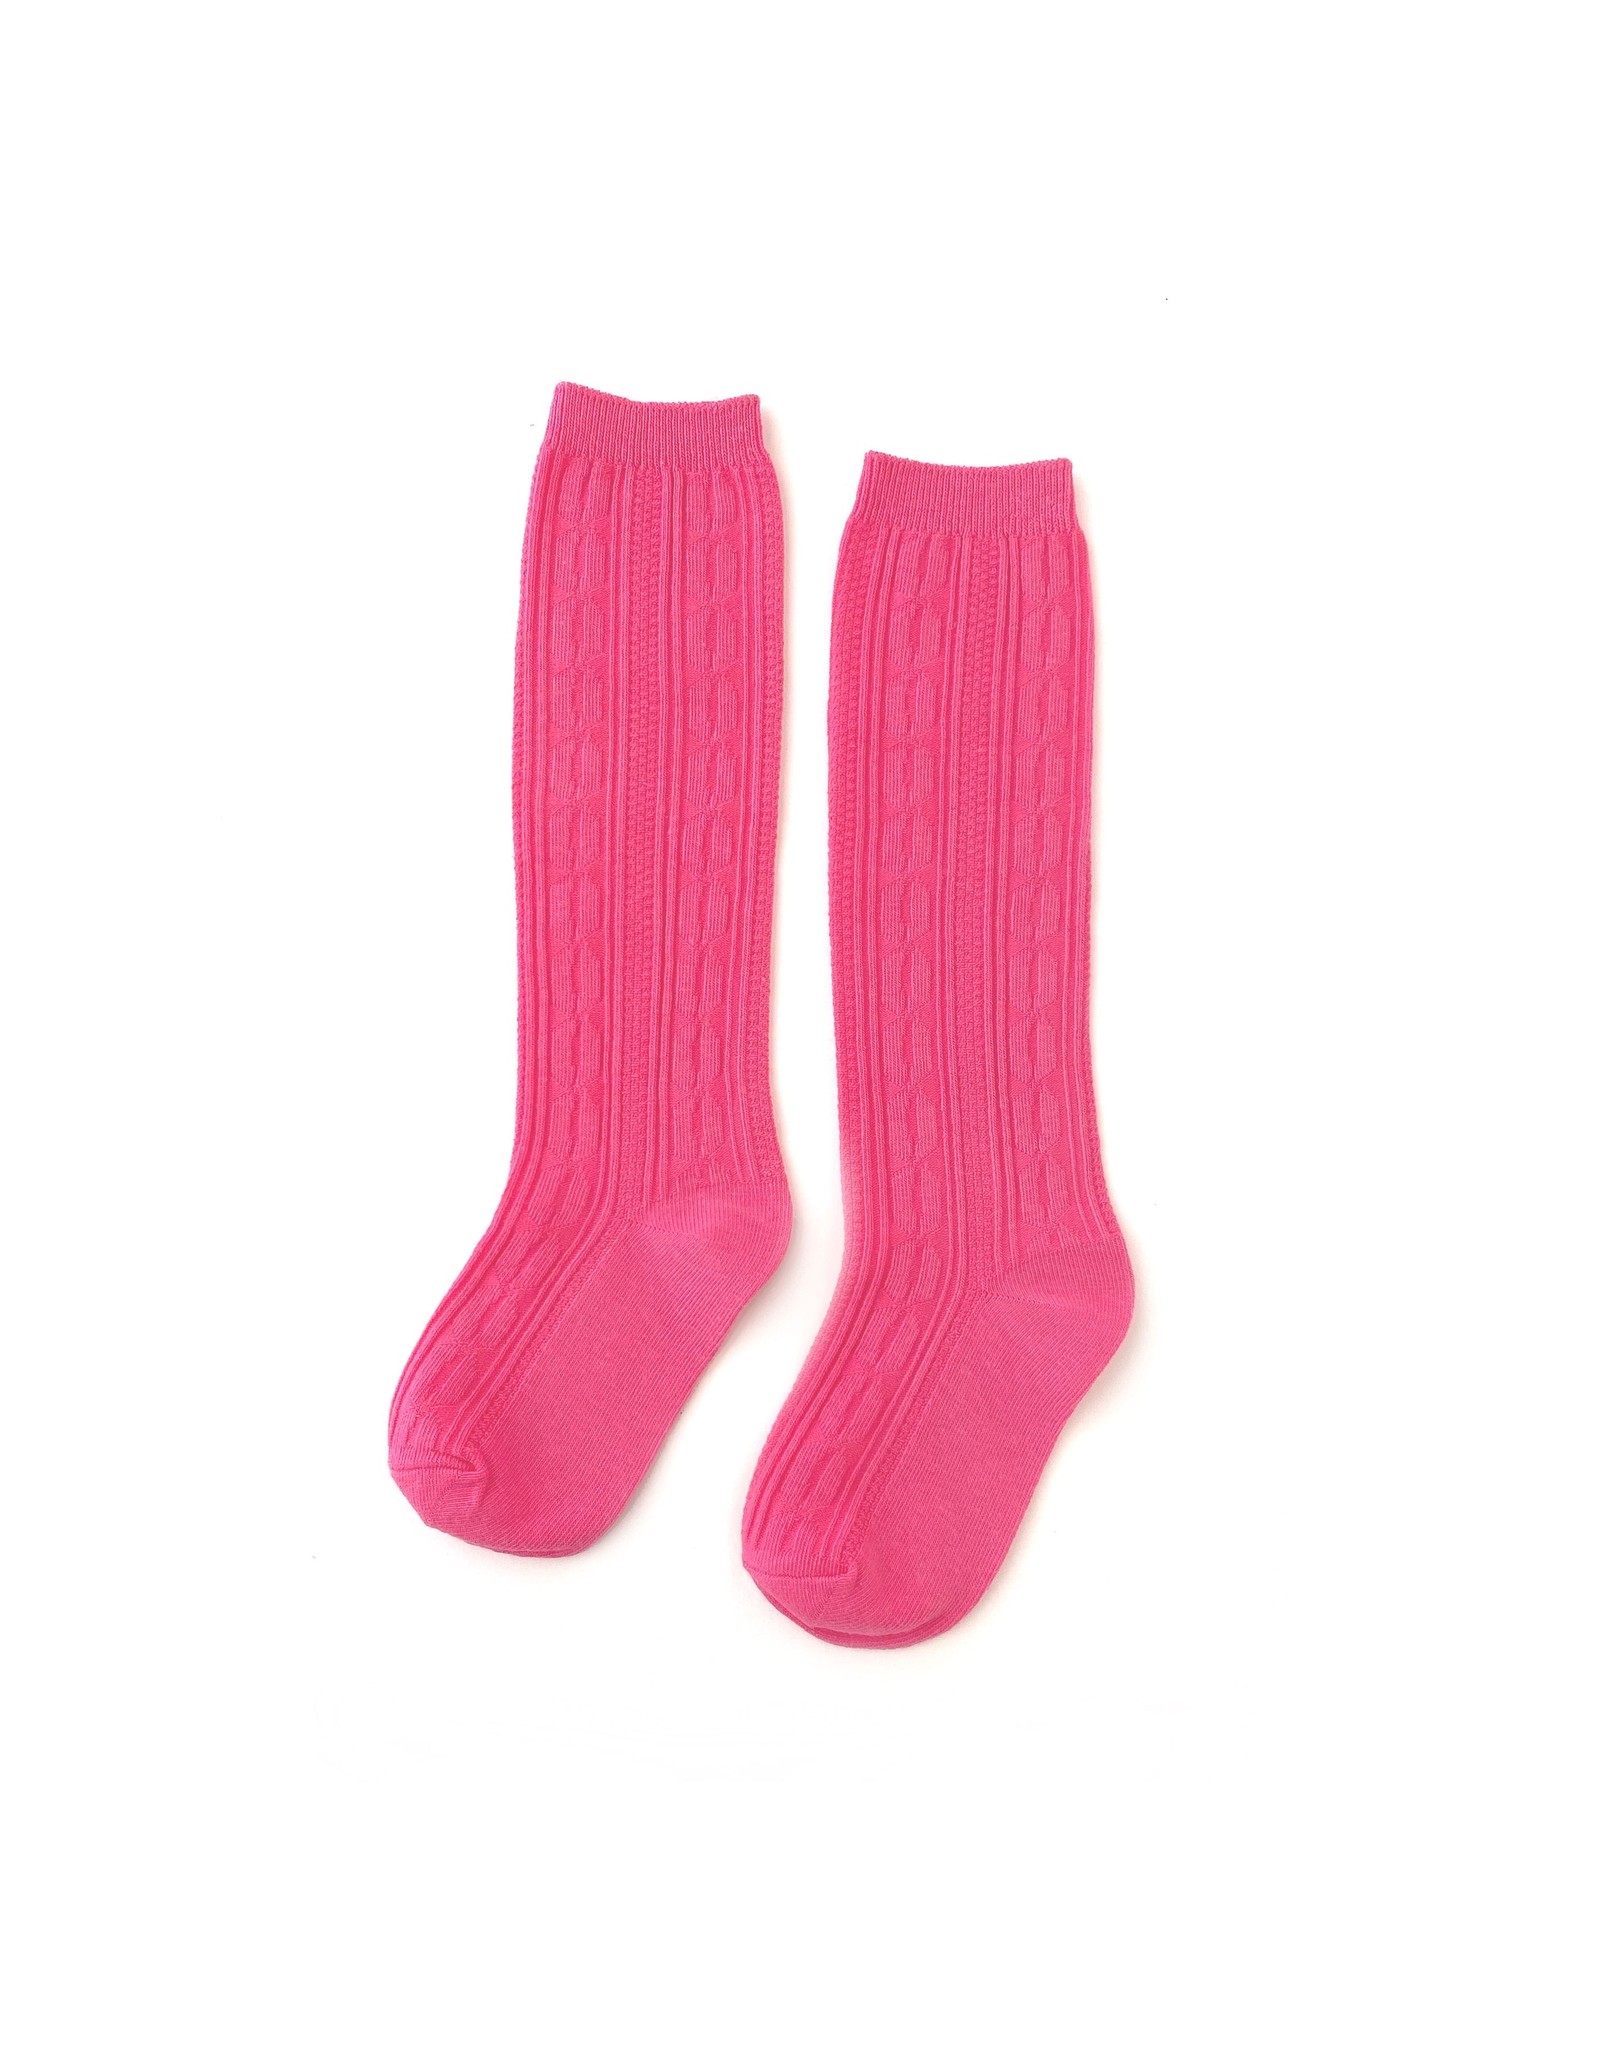 Cable Knit Knee Highs - assorted colors/sizes